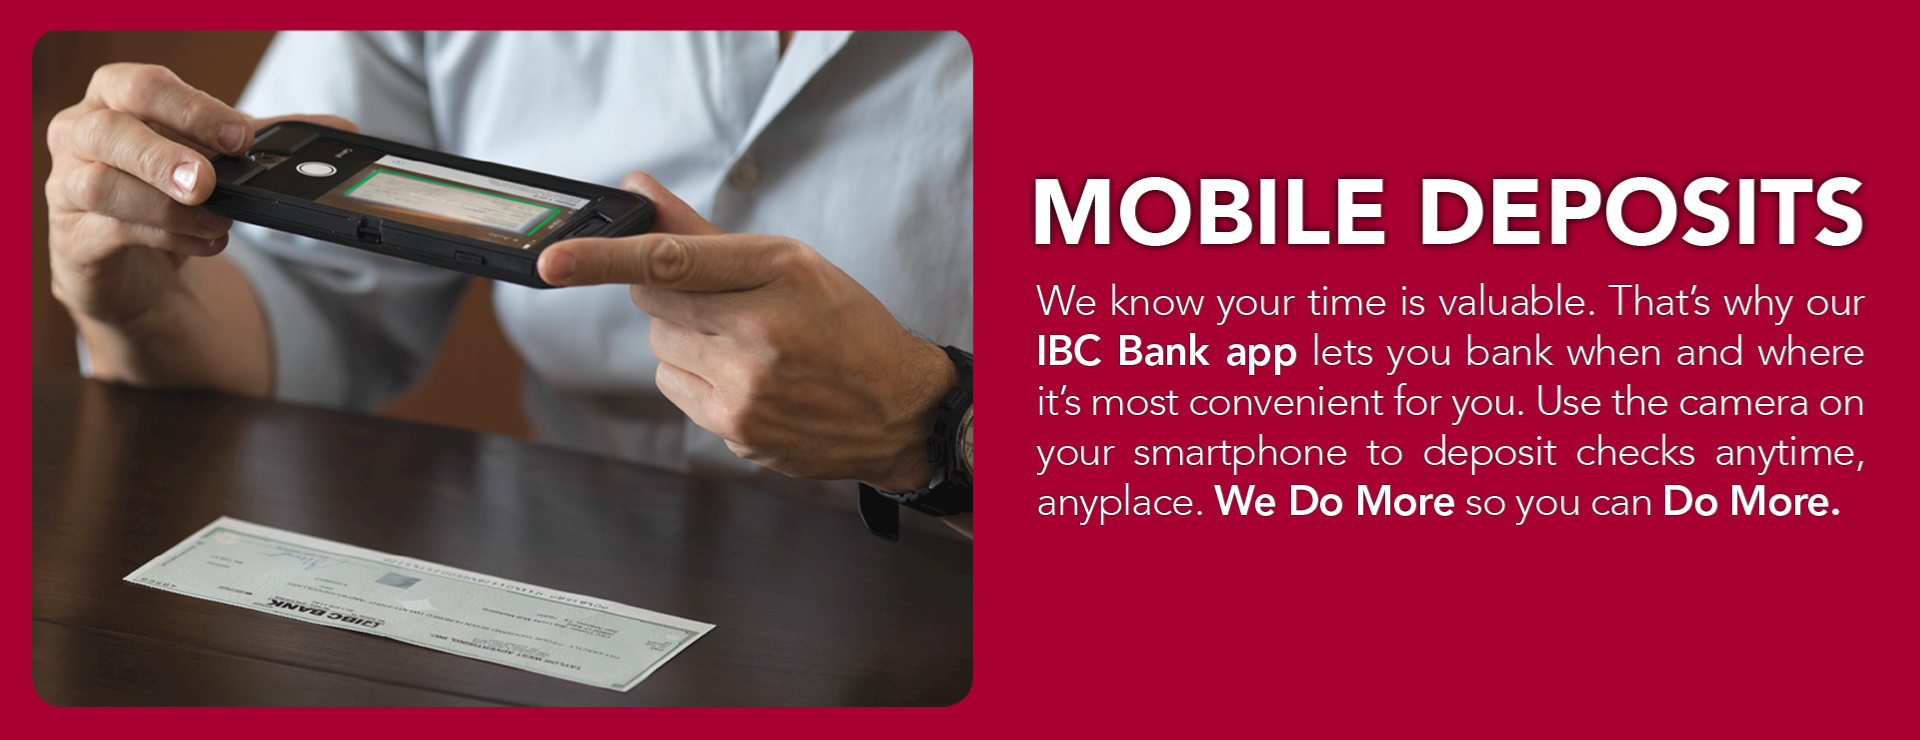 ibc online mobile banking